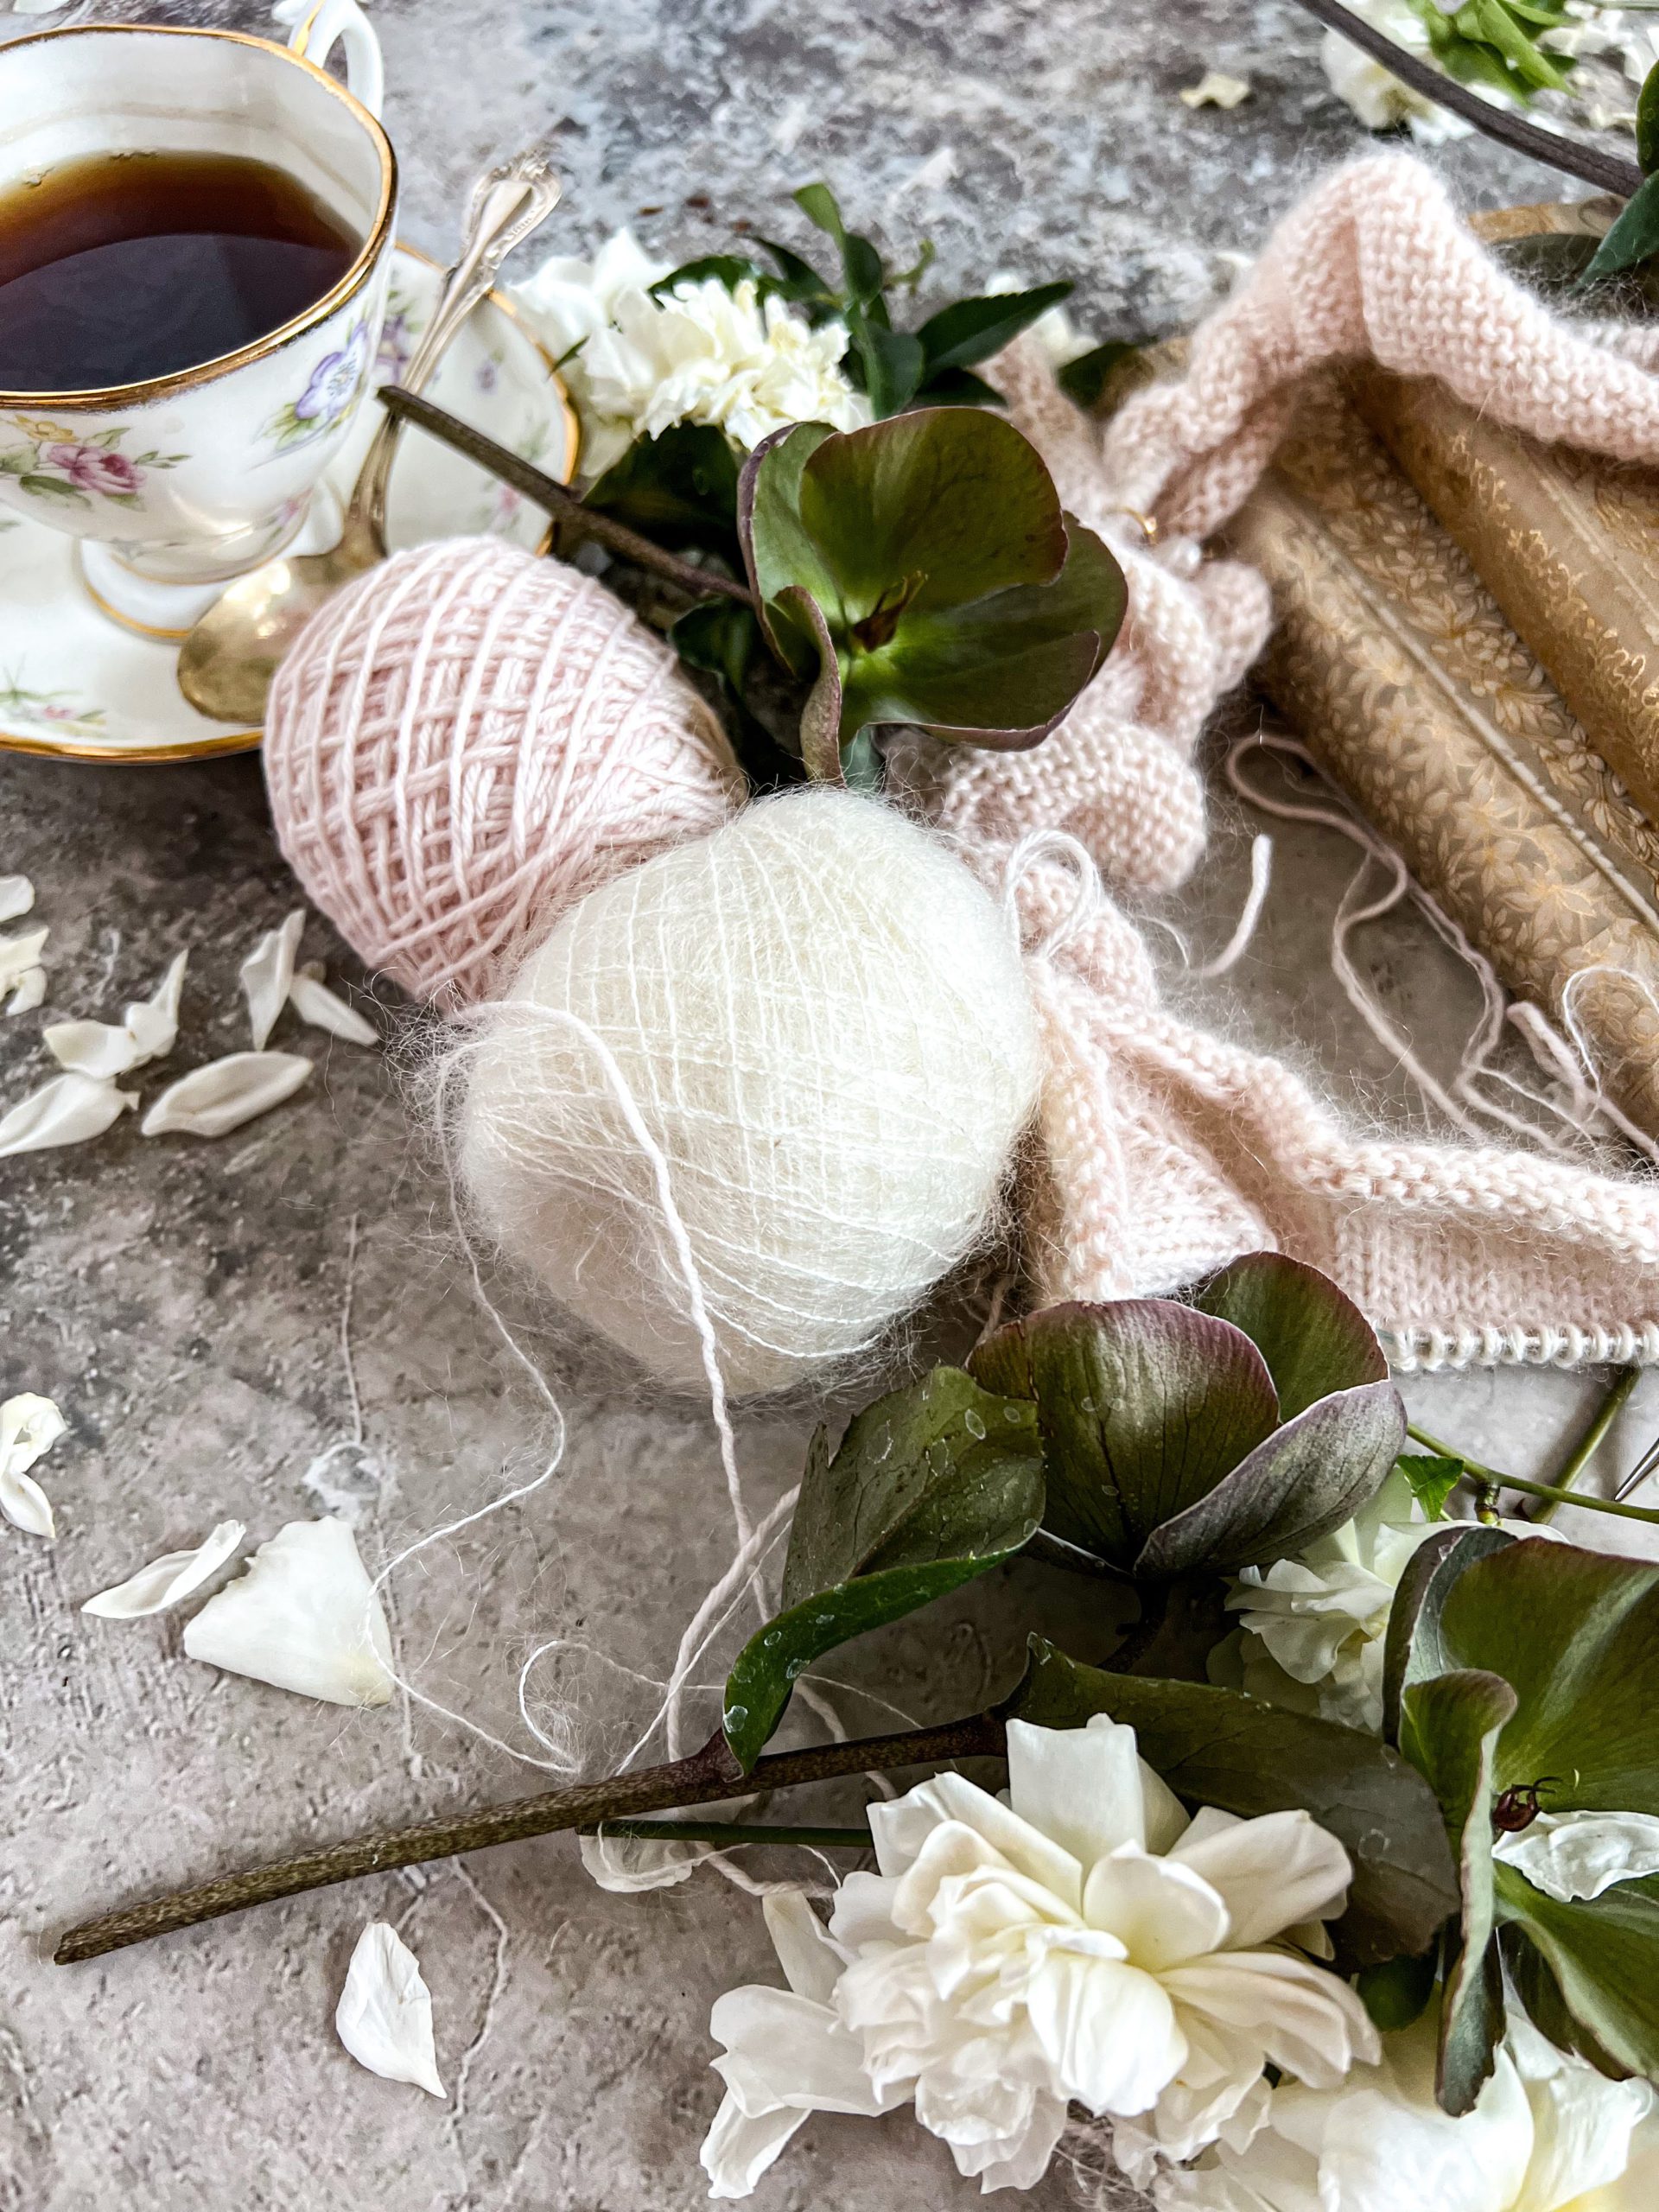 A close-up on two balls of yarn, one pink and one white, surrounded by flowers, a teacup, and some knitting